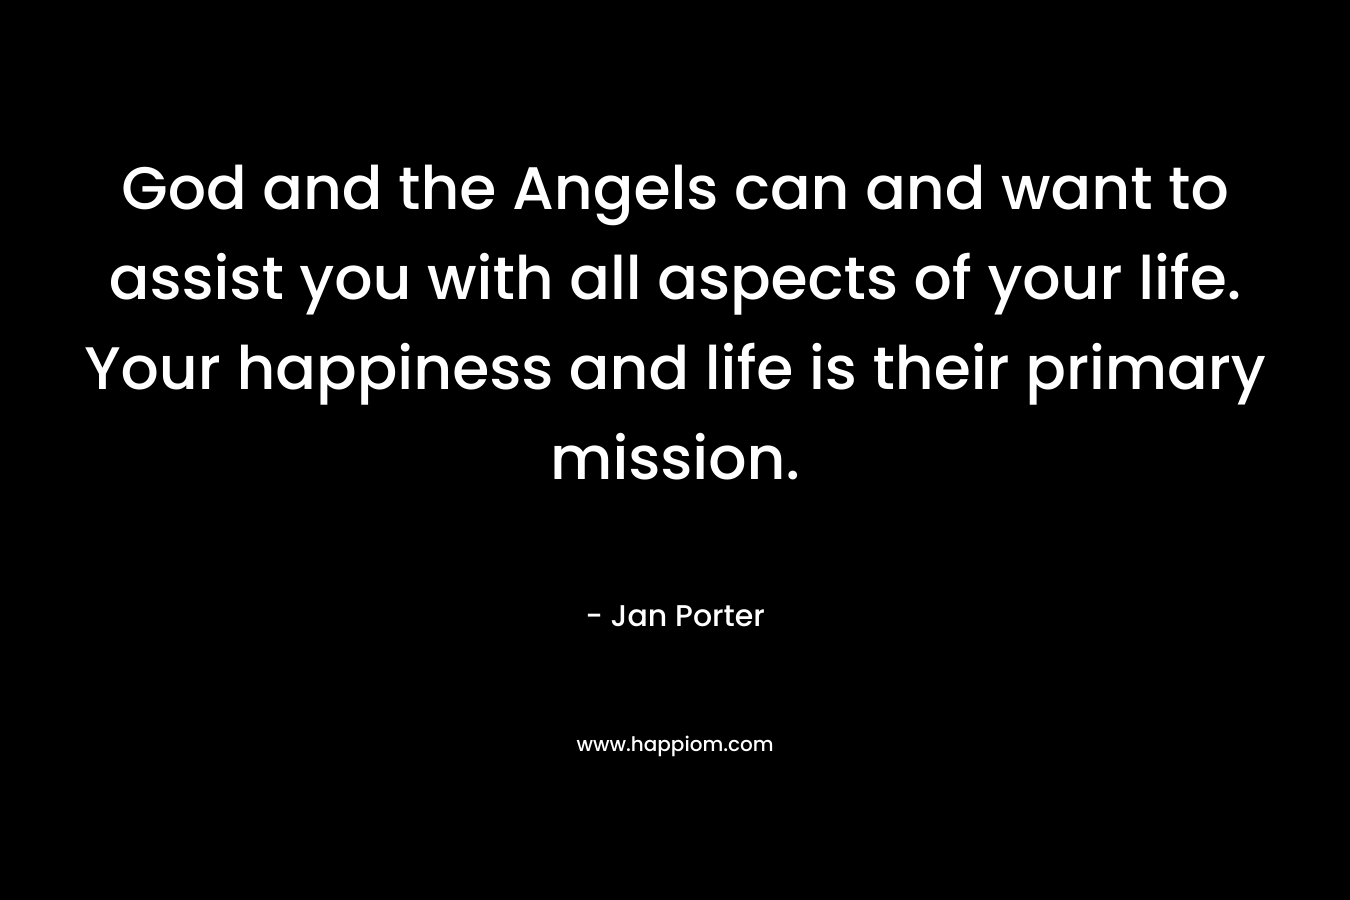 God and the Angels can and want to assist you with all aspects of your life. Your happiness and life is their primary mission. – Jan Porter